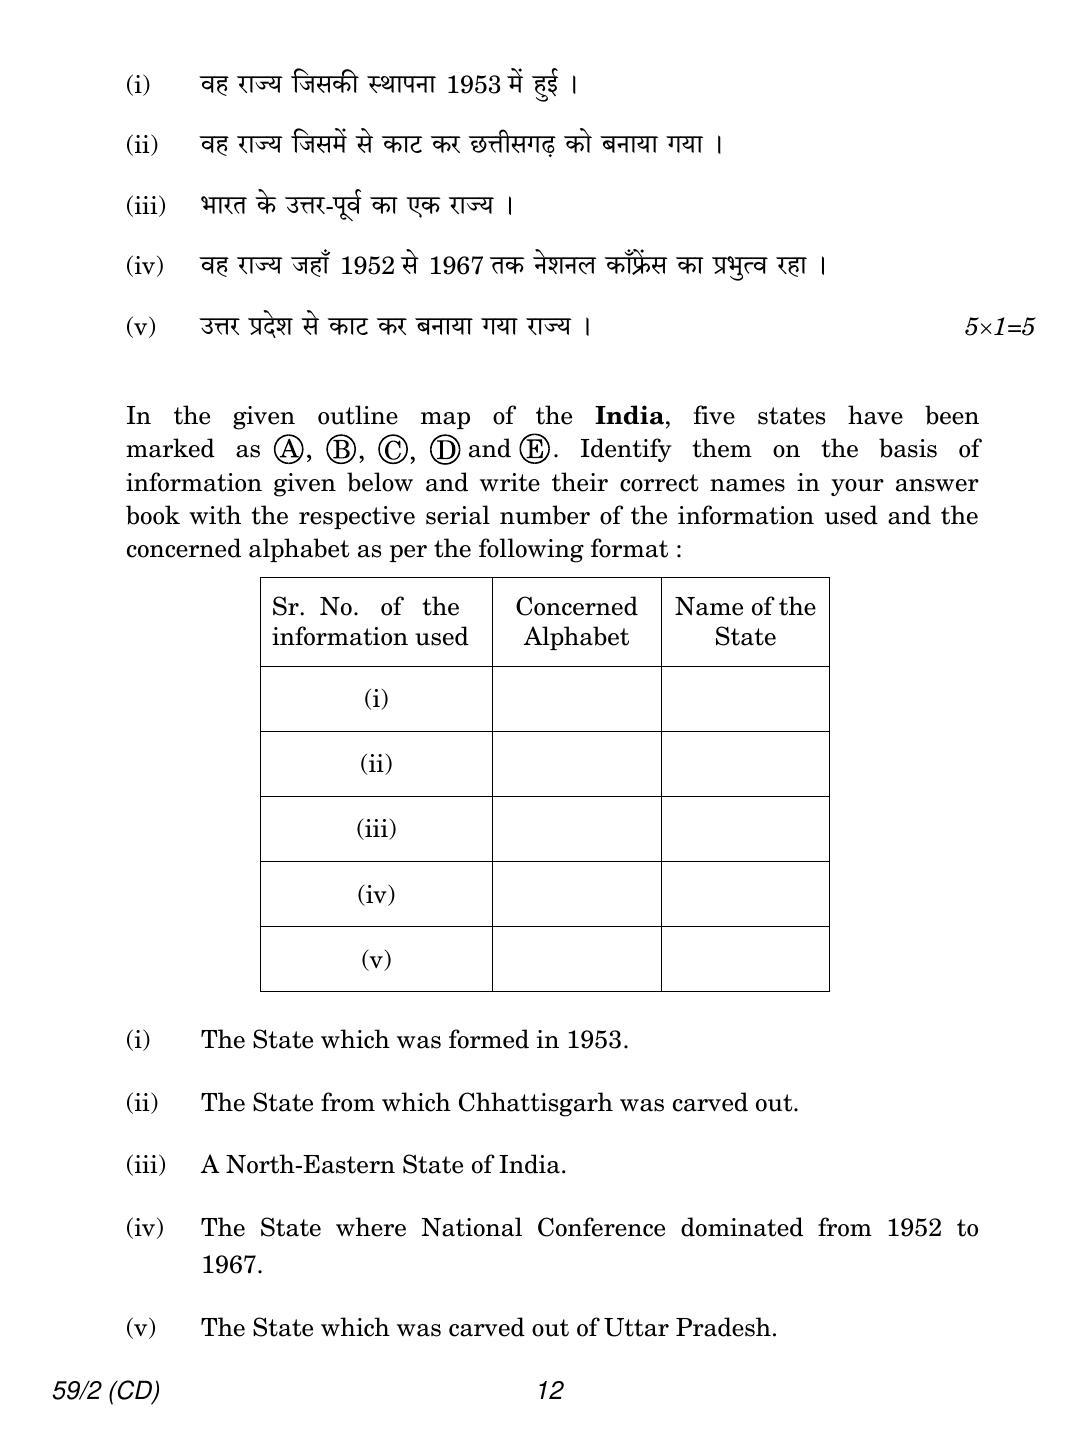 CBSE Class 12 59-2 POLITICAL SCIENCE CD 2018 Question Paper - Page 12